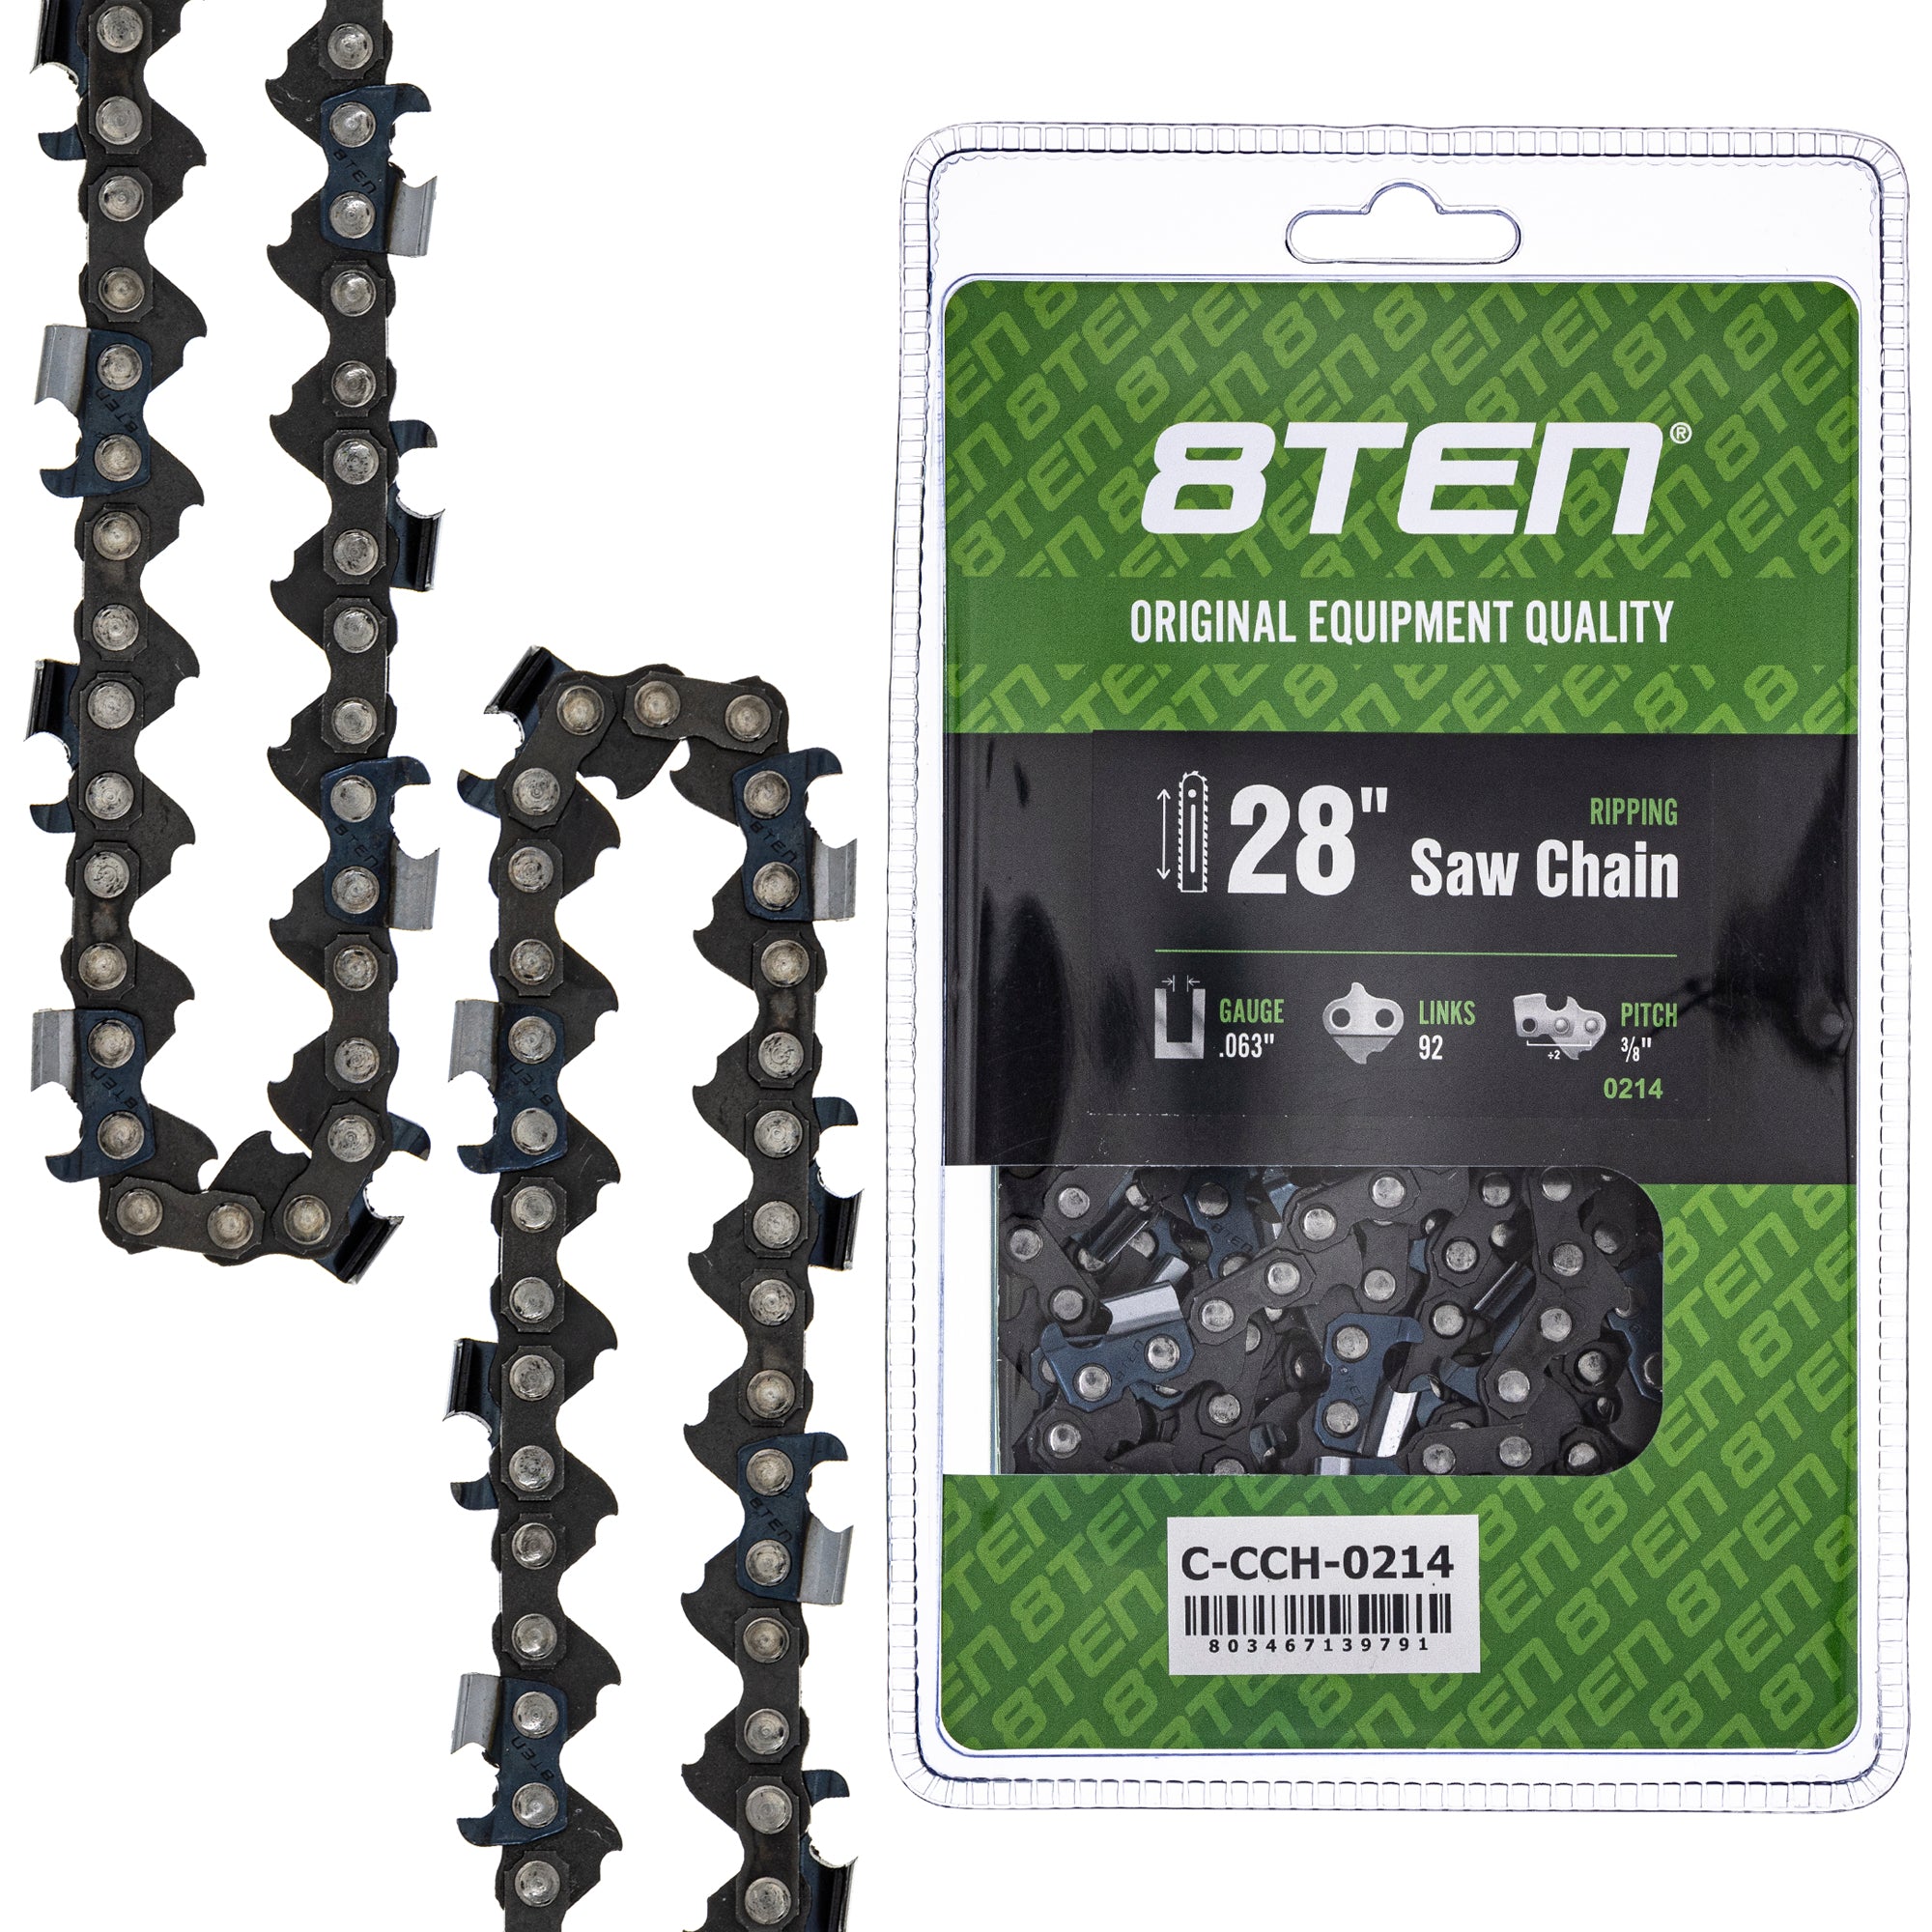 Chainsaw Chain 28 Inch .063 3/8 92DL for zOTHER MS 066 064 056 8TEN 810-CCC2436H